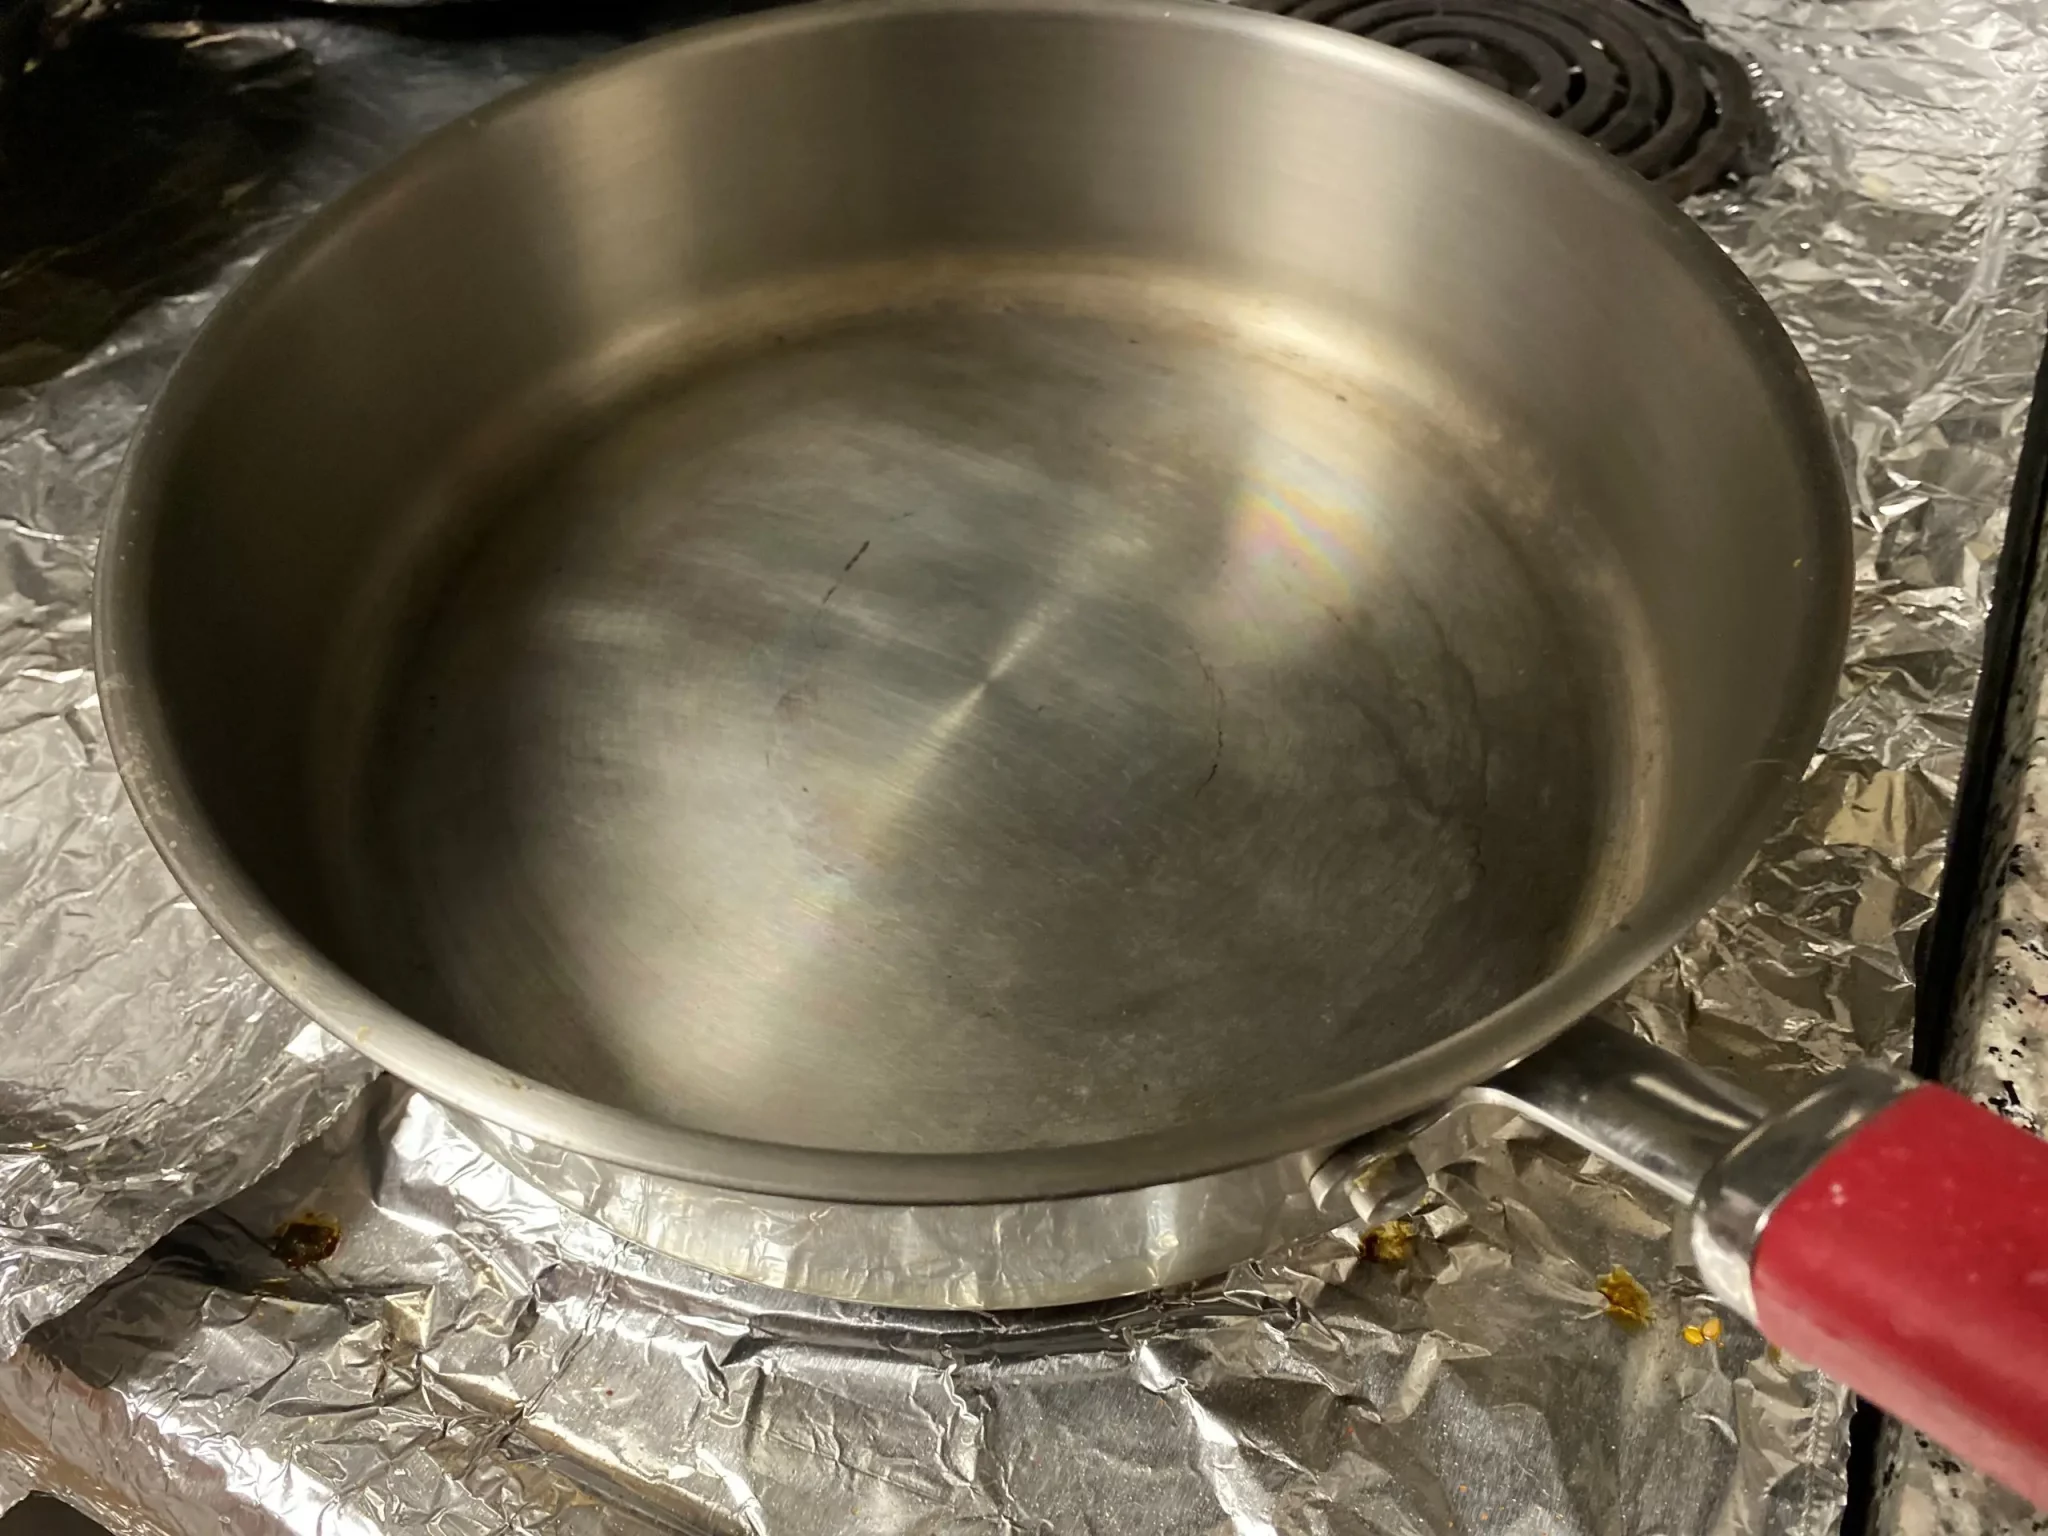 How to make stainless steel pan non stick